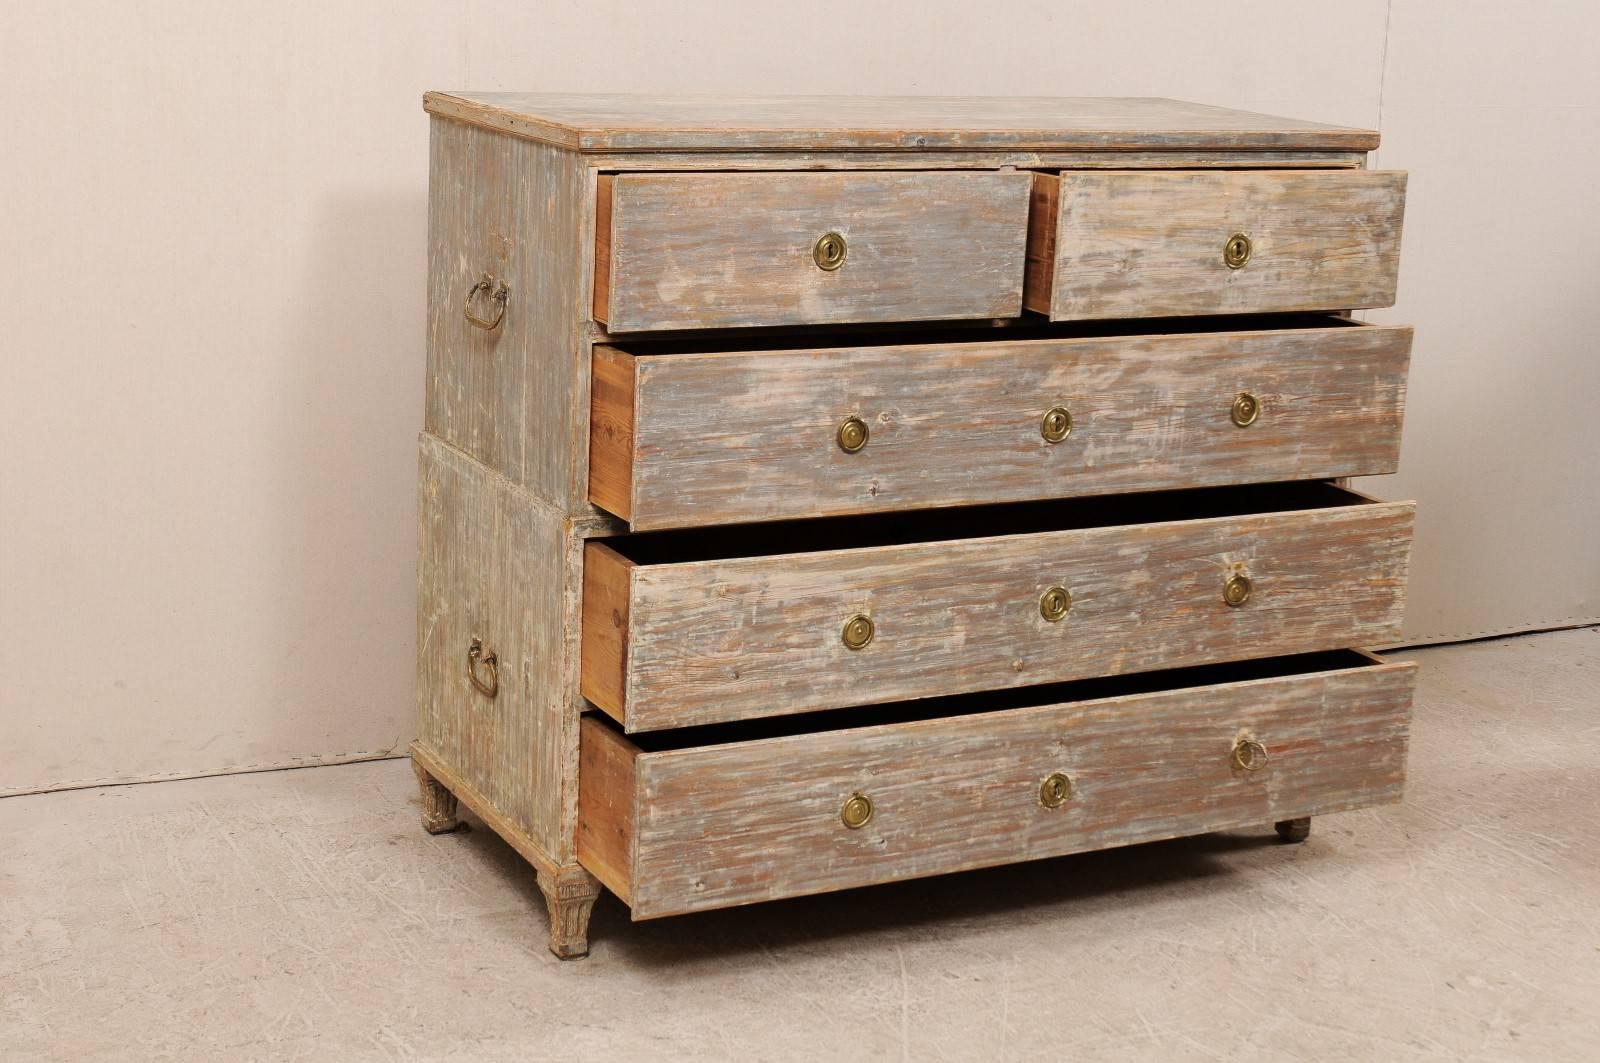 Brass Swedish Late 18th Century Five-Drawer Wood Chest with Scraped Paint